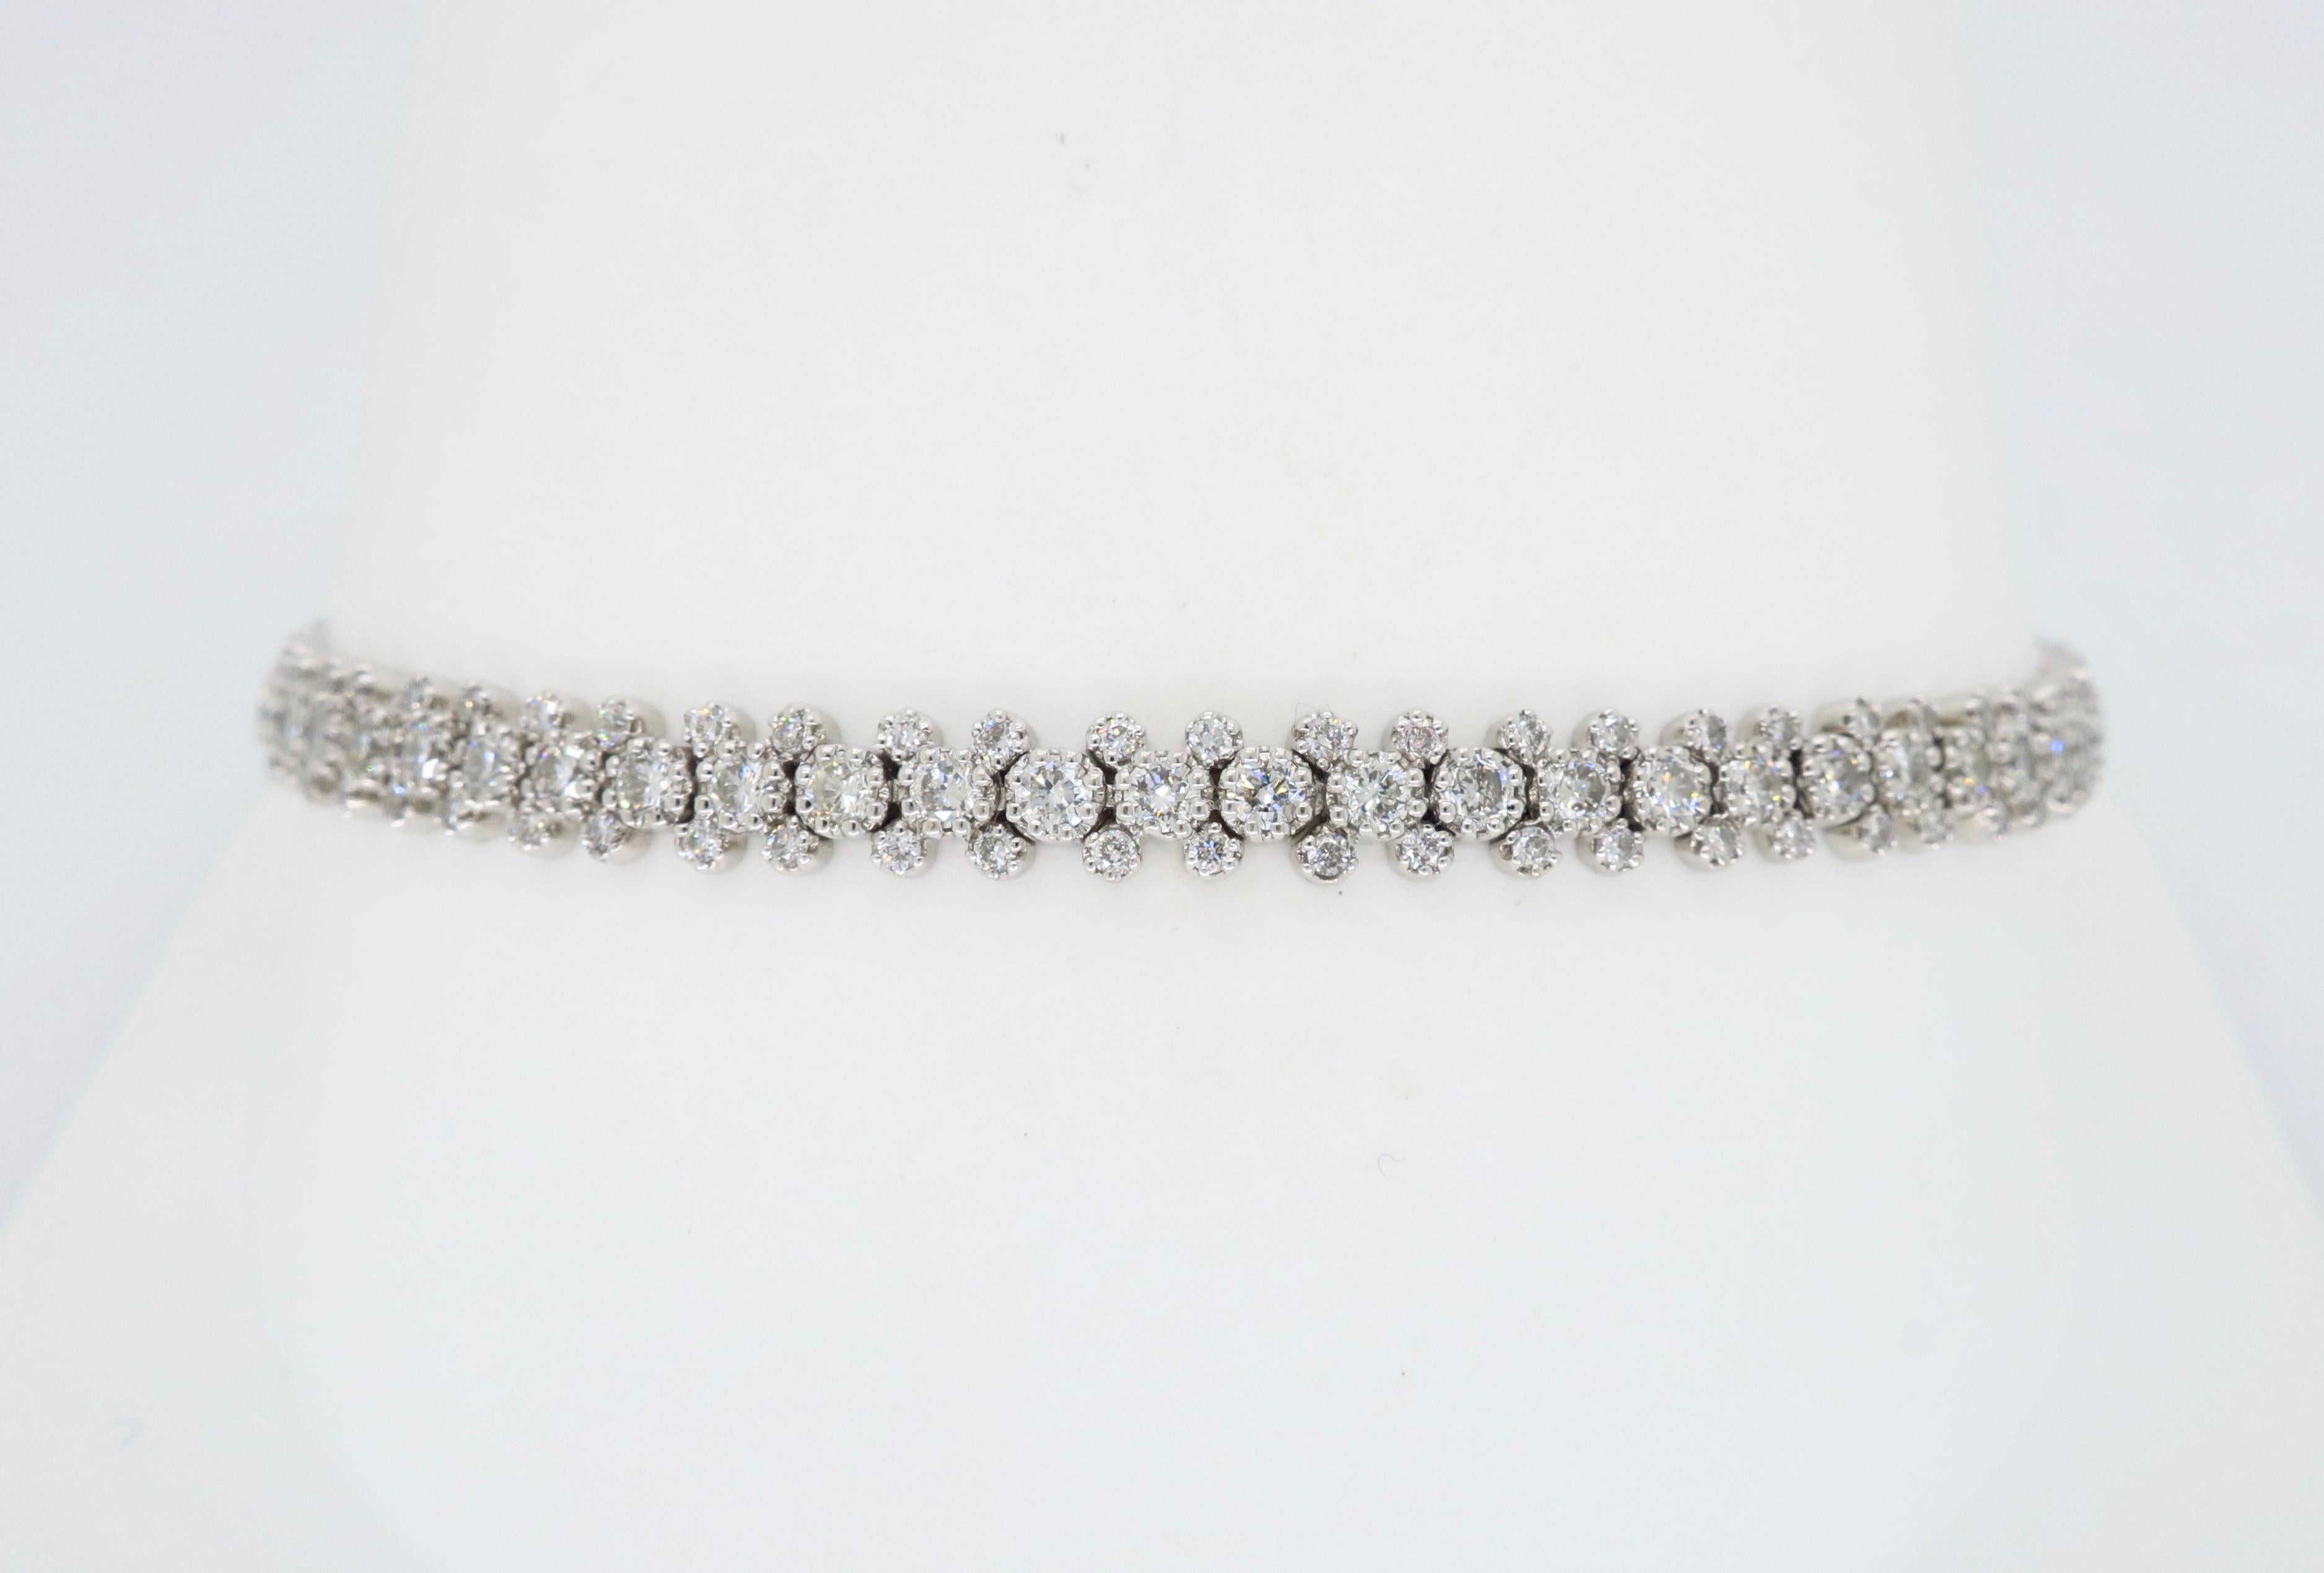 Unique cluster style diamond tennis bracelet crafted in 18k white gold. 

Diamond Carat Weight: Approximately 2.90CTW
Diamond Cut: Round Brilliant Cut 
Color: Average G-I
Clarity: Average VS-I
Metal: 18K White Gold
Marked/Tested: Stamped 